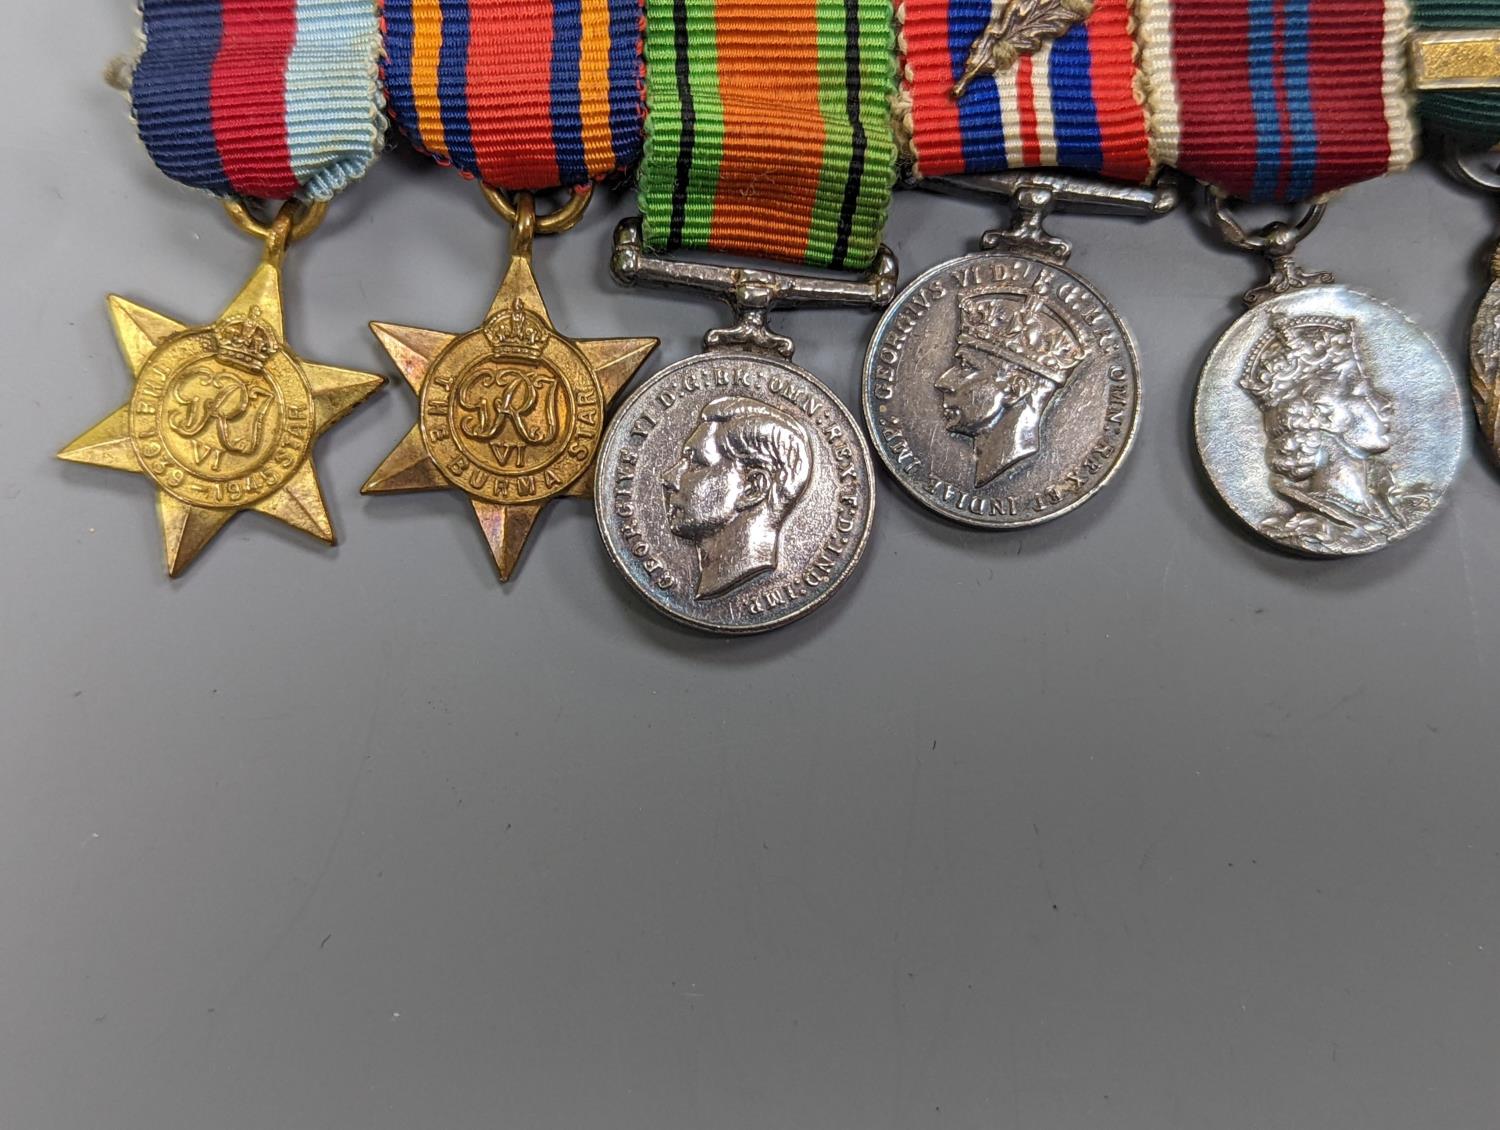 A WWII medal group of six, with miniatures, and a royal commemorative medal, 1937 - Image 7 of 15